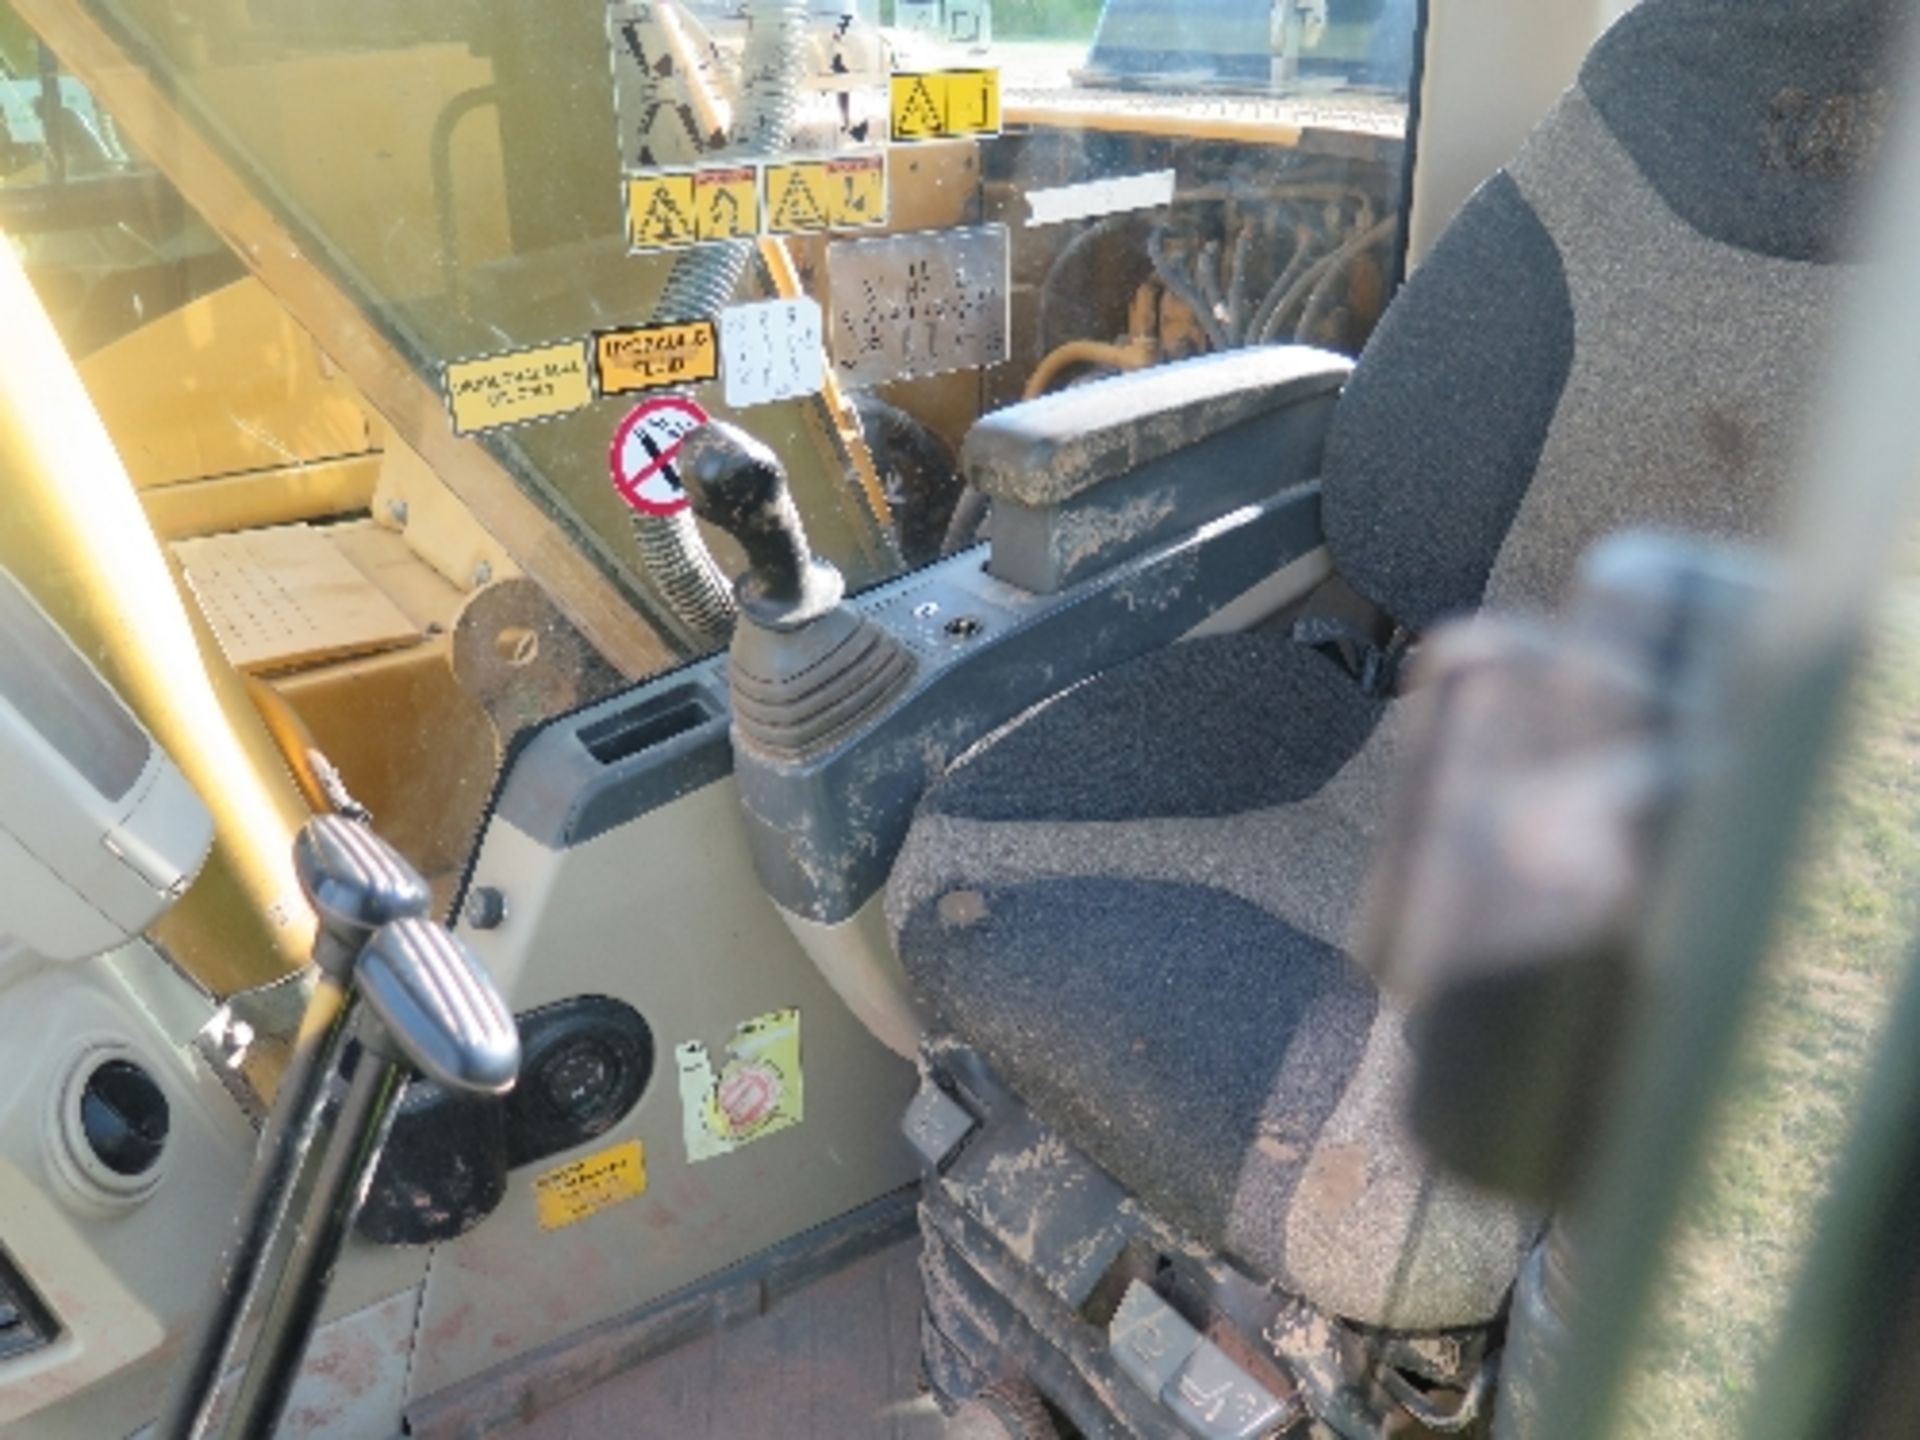 Caterpillar 312C excavator 4972 hrs 2007 145520
POOR LEFT HAND TRACKING IN REVERSE
ALL LOTS are - Image 7 of 8